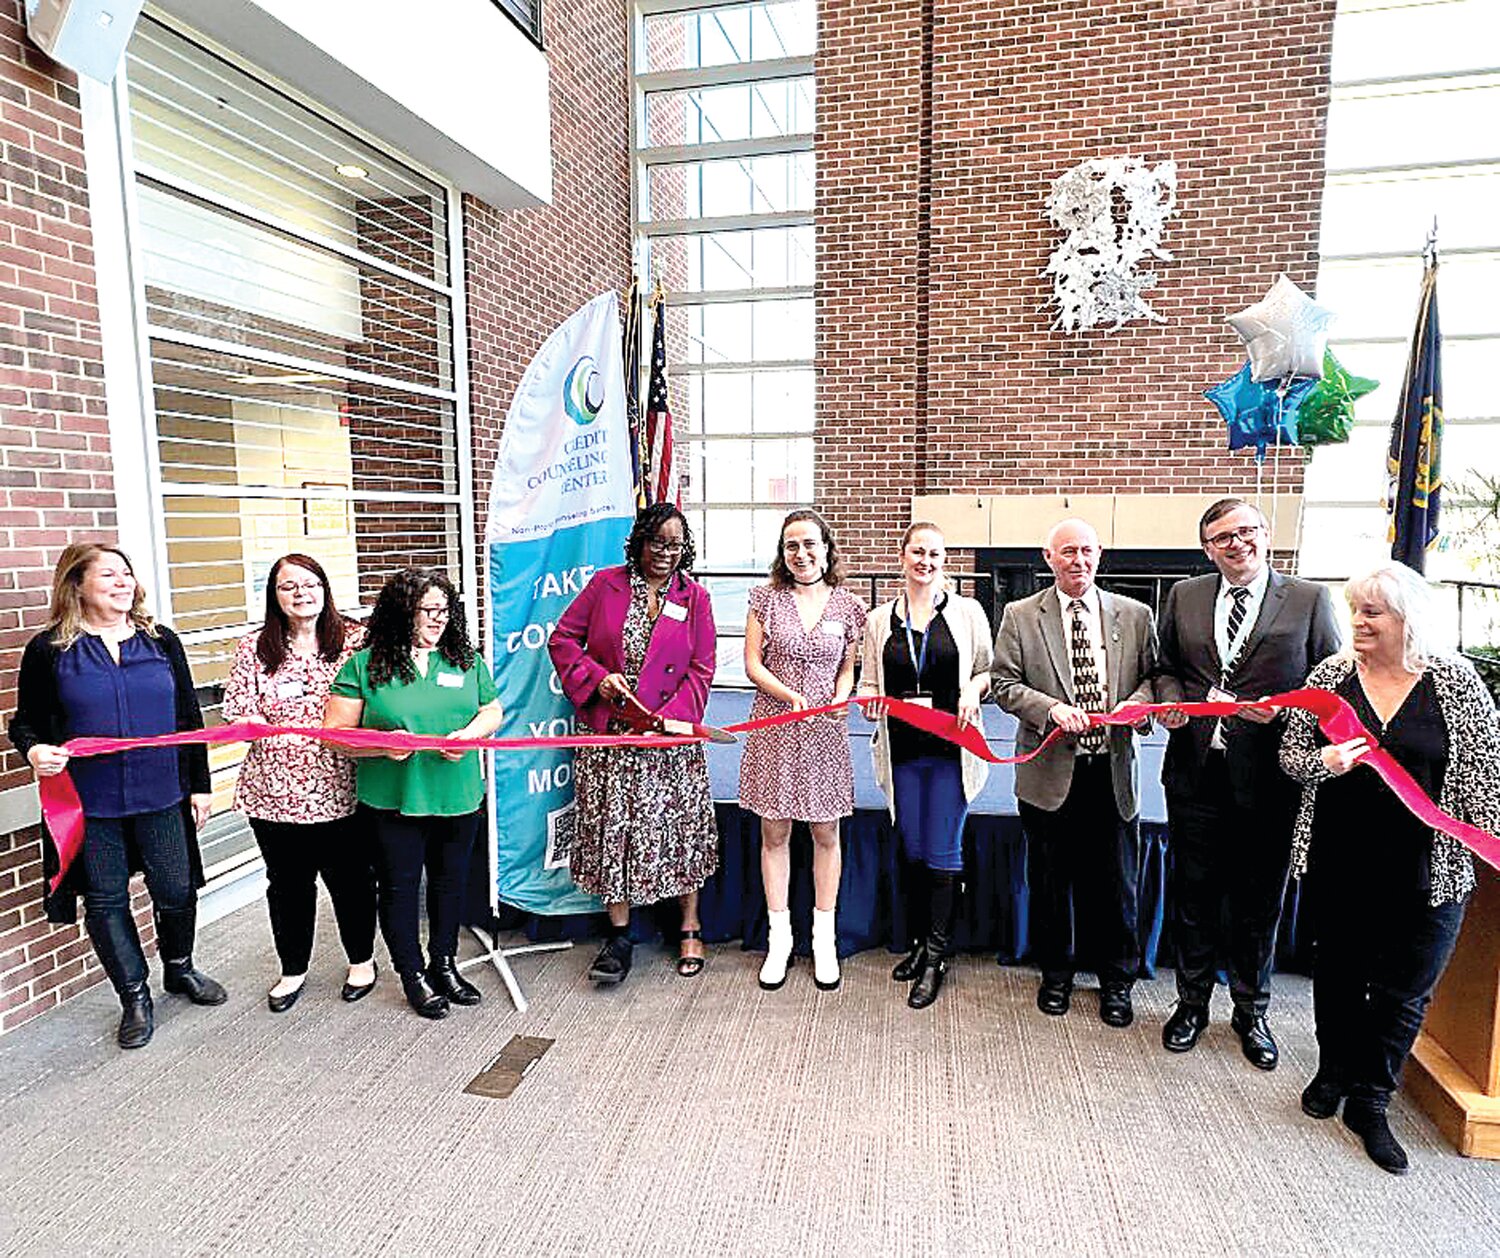 From left: Paula Powers-Watts, executive director of Credit Counseling Center cuts the official red ribbon in celebration of CCC’s new office at the Epstein Campus at Lower Bucks - Bucks County Community College, with from left, Rep. Tina Davis, Jennifer Doyle, Rosa Reyes Santiago, Jamie Lehman, Laura Jones-Morales, James Sell (Executive Dean, BCCC), Jody Seutter (AVP Academic Affairs, BCCC), Rose Cooper (Director, Epstein Campus).